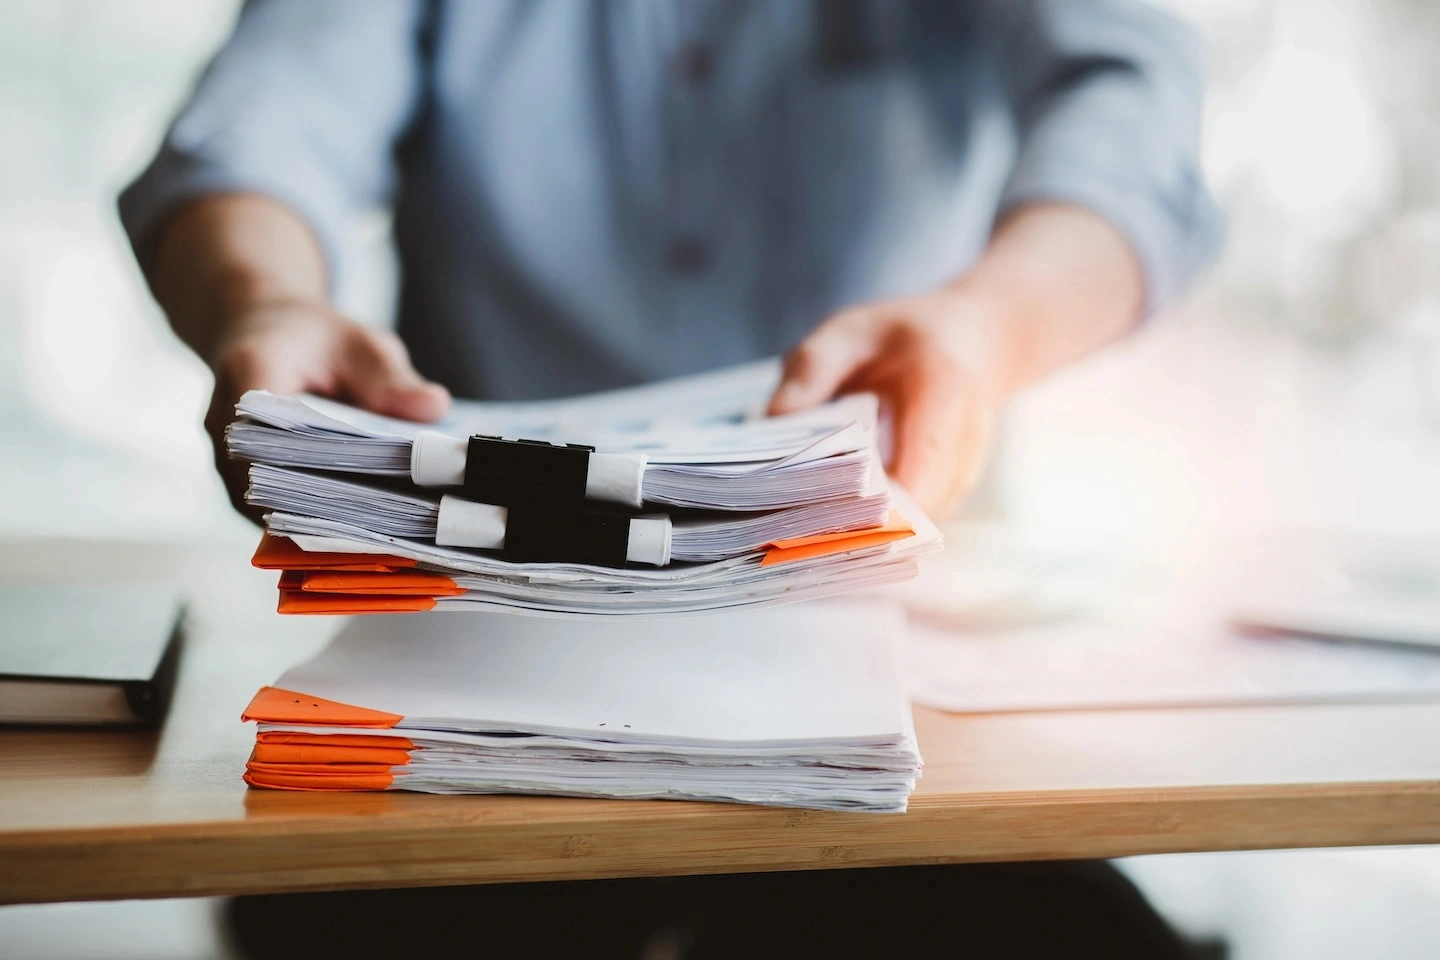 Person placing stack of papers on top of a desk.